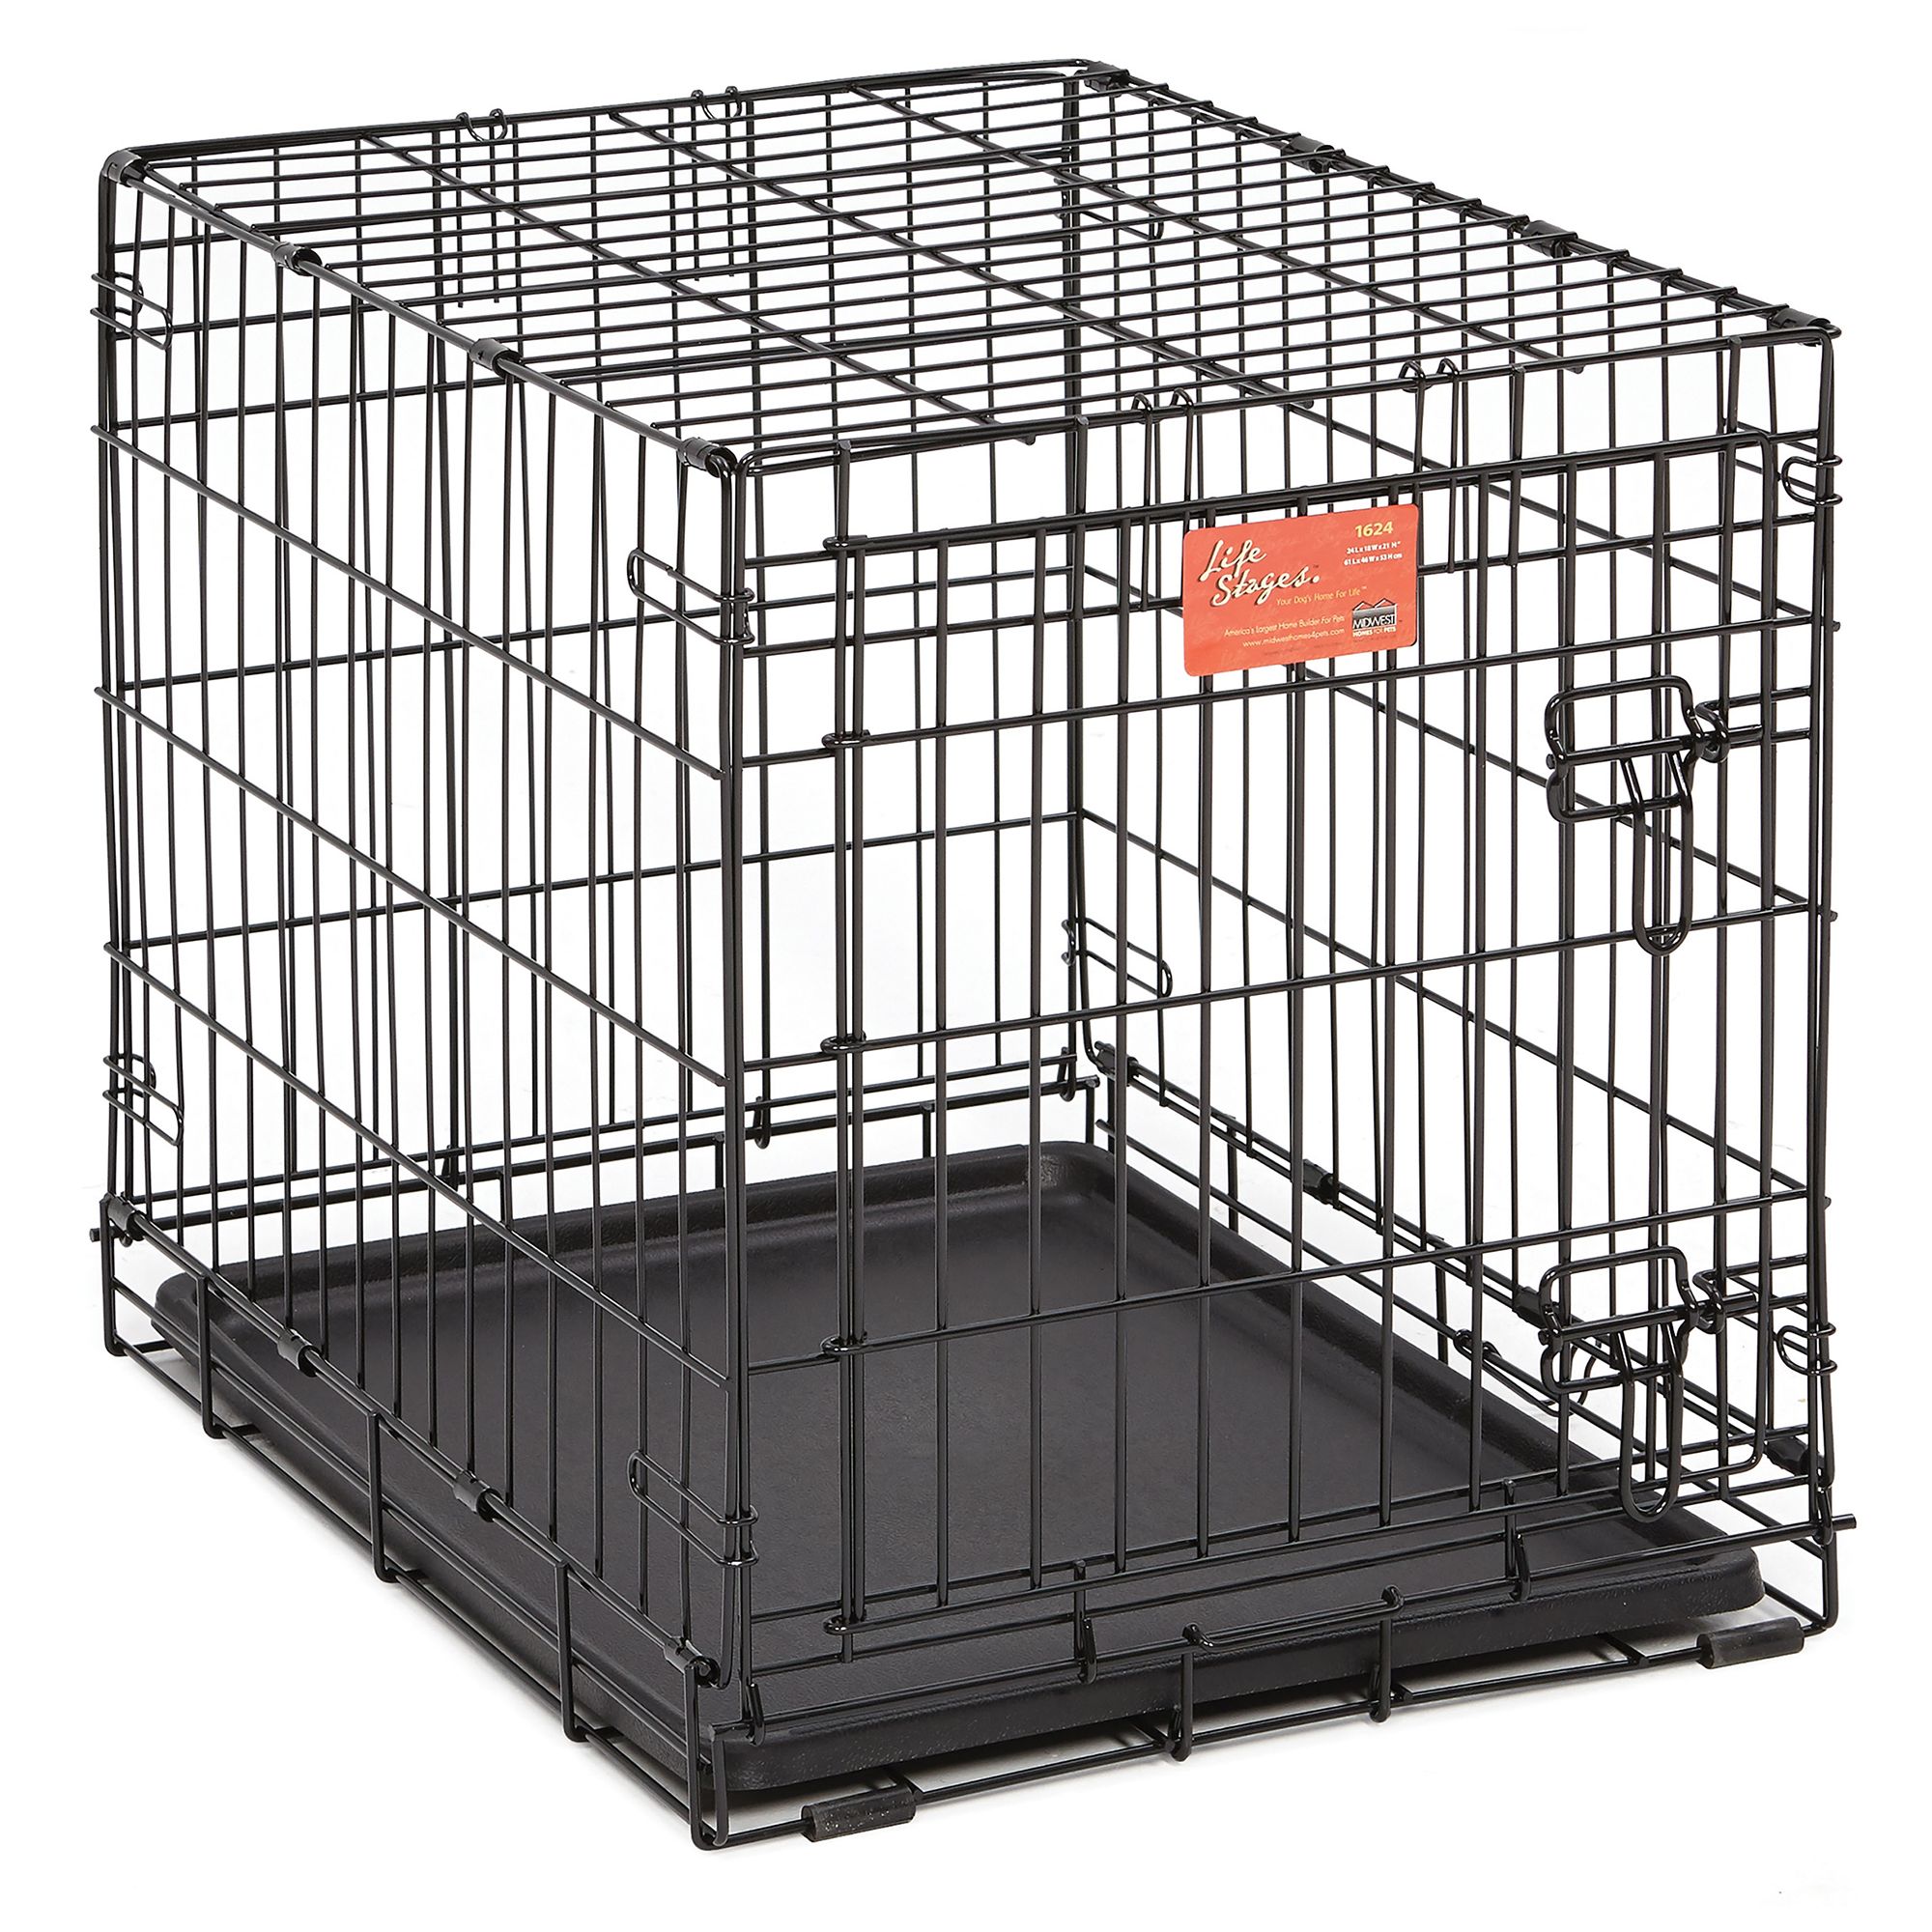 20+ Small Dog Crates For Sale Near Me Images